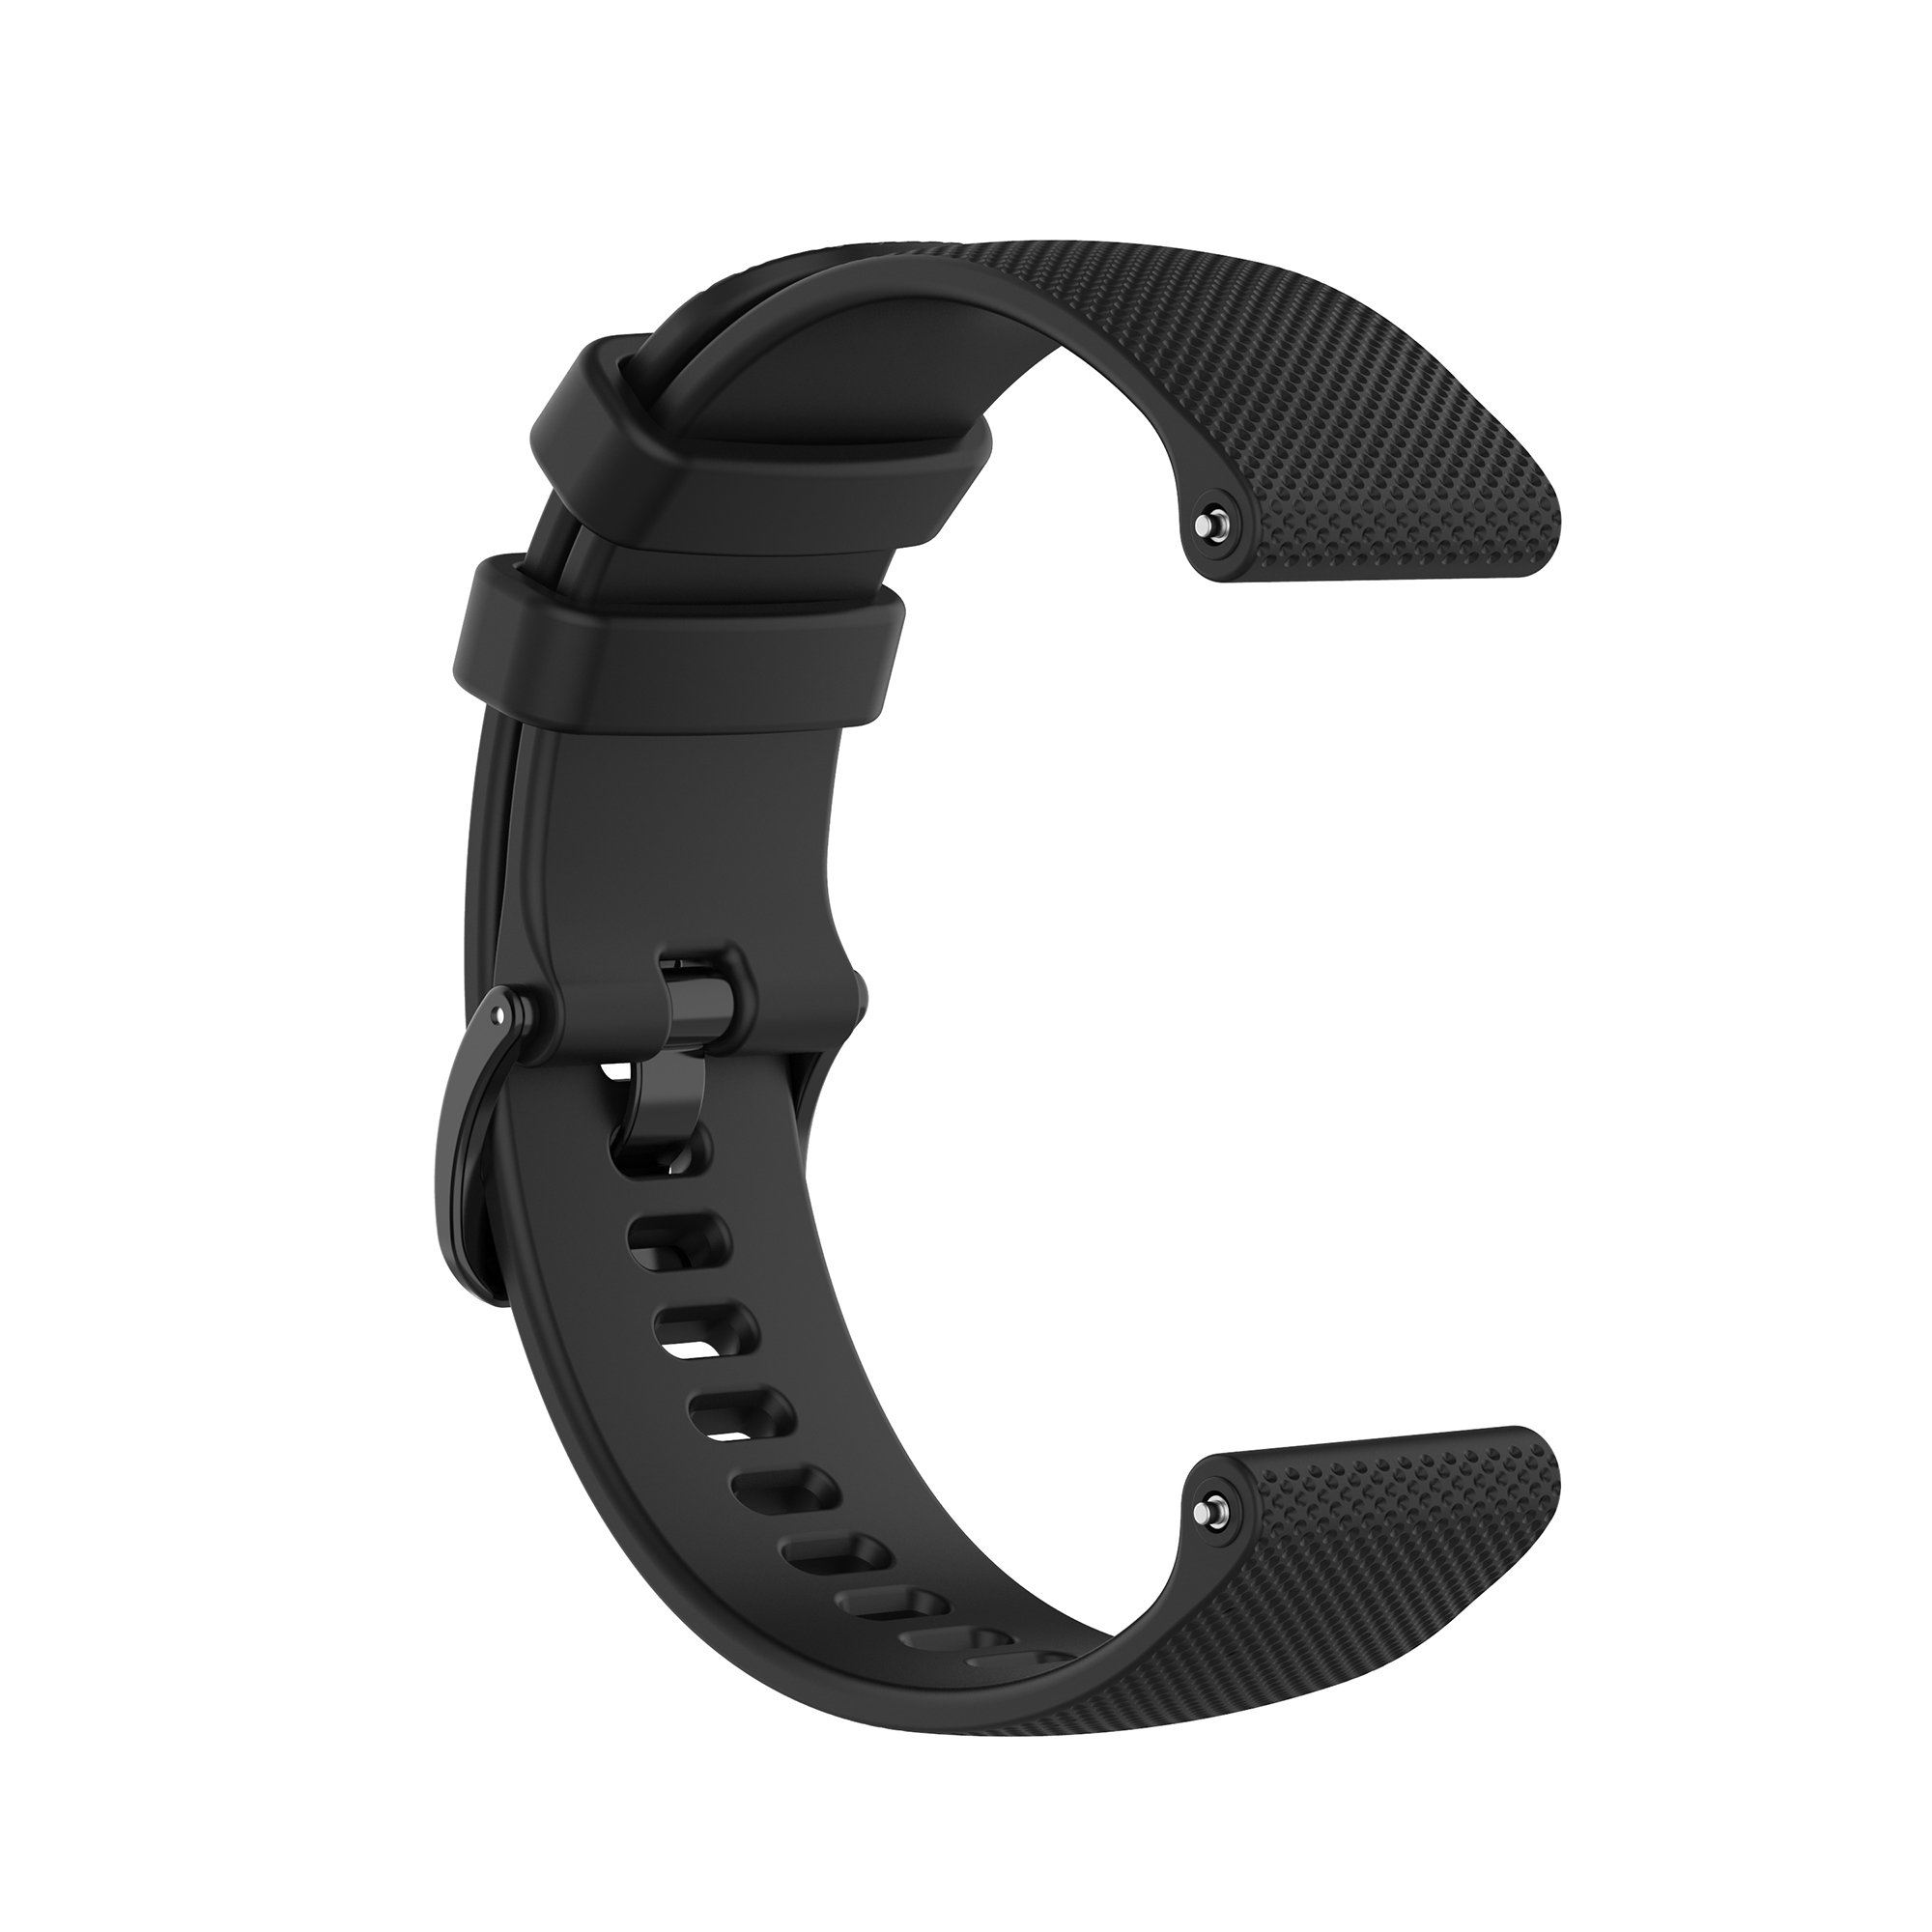 20mm-Width-Soft-Silicone-Watch-Band-Watch-Strap-Replacement-for-lrmGarmin-Venu-SQ-BW-HL1-HL2-Haylou--1805584-6